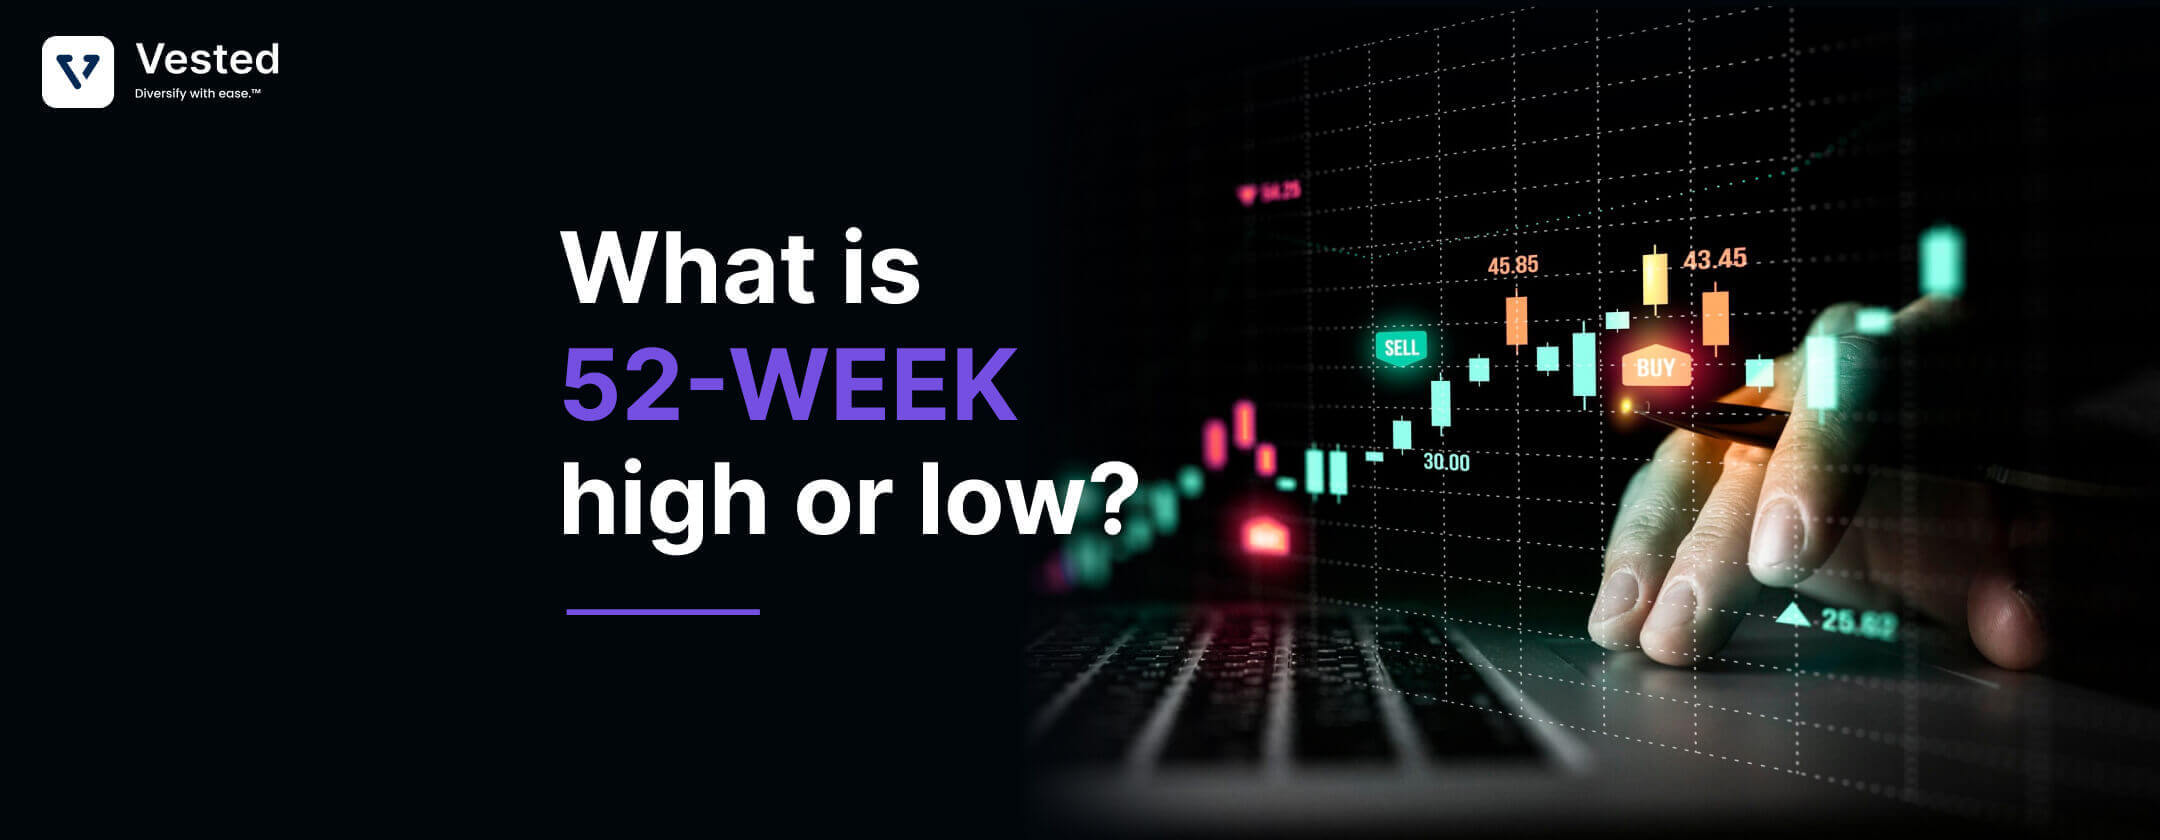 What is 52 week high/low?